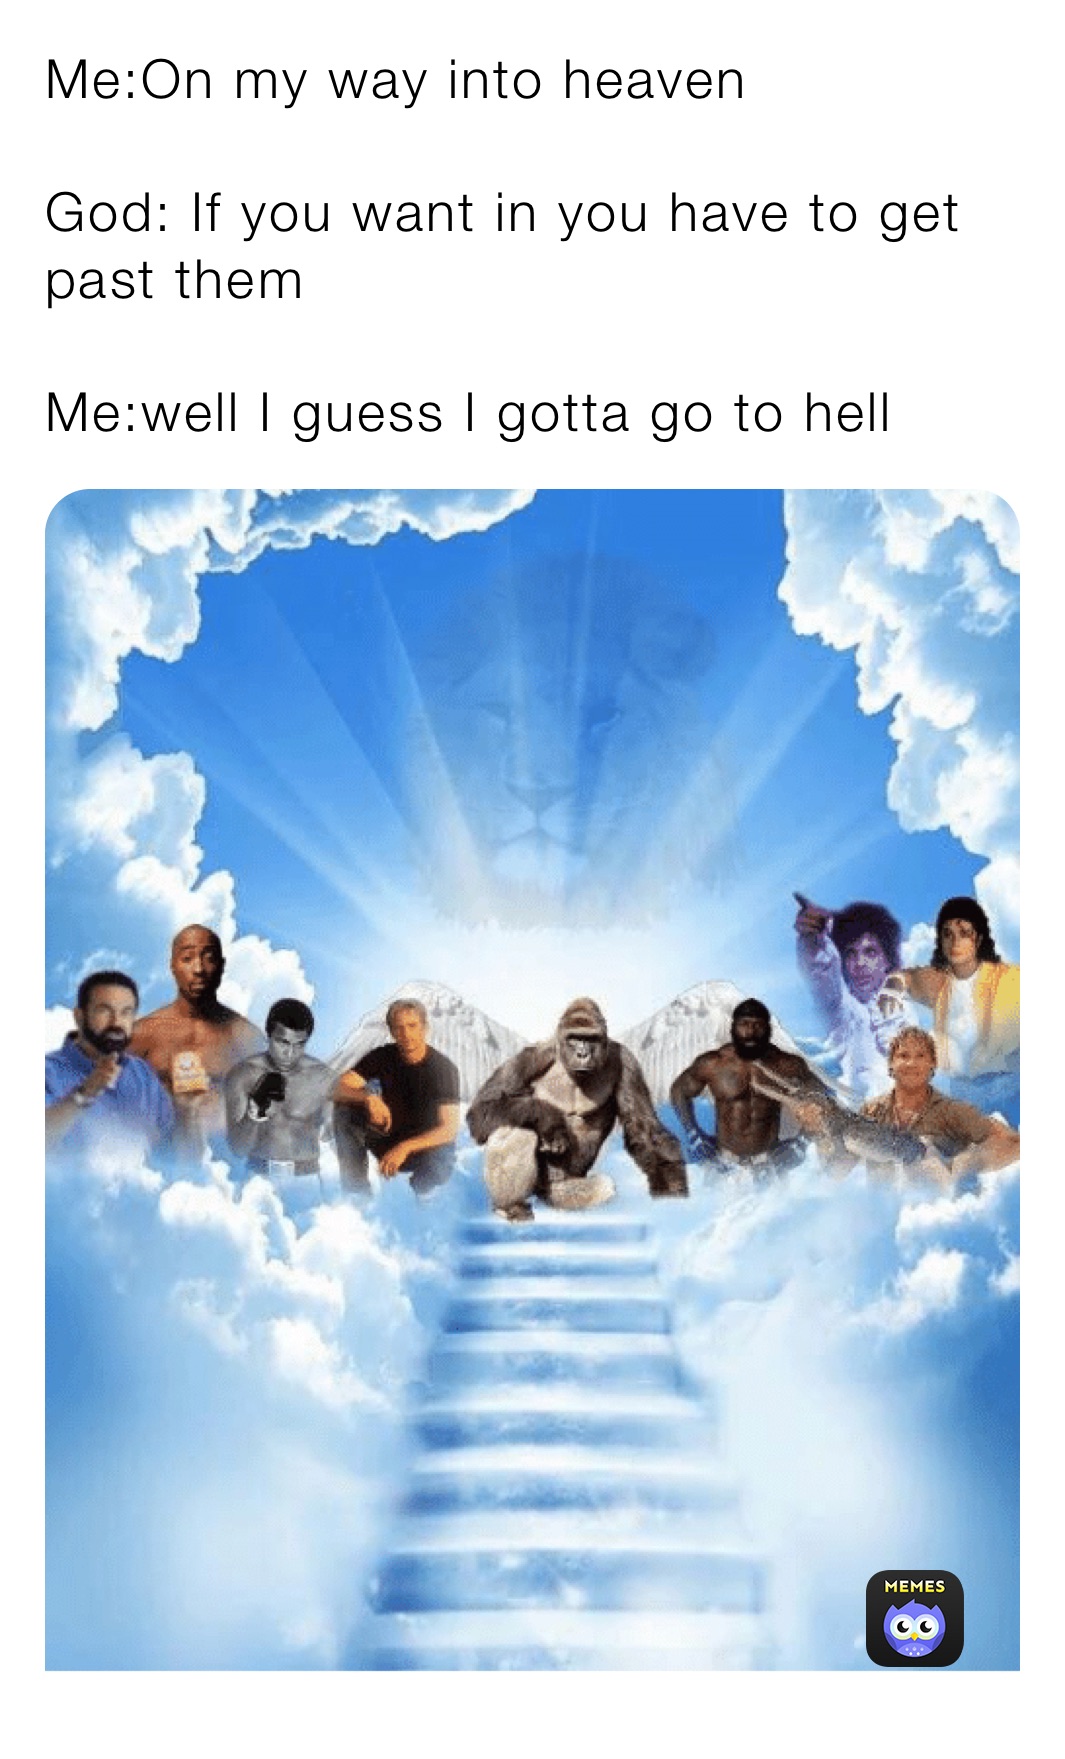 Me:On my way into heaven

God: If you want in you have to get past them

Me:well I guess I gotta go to hell